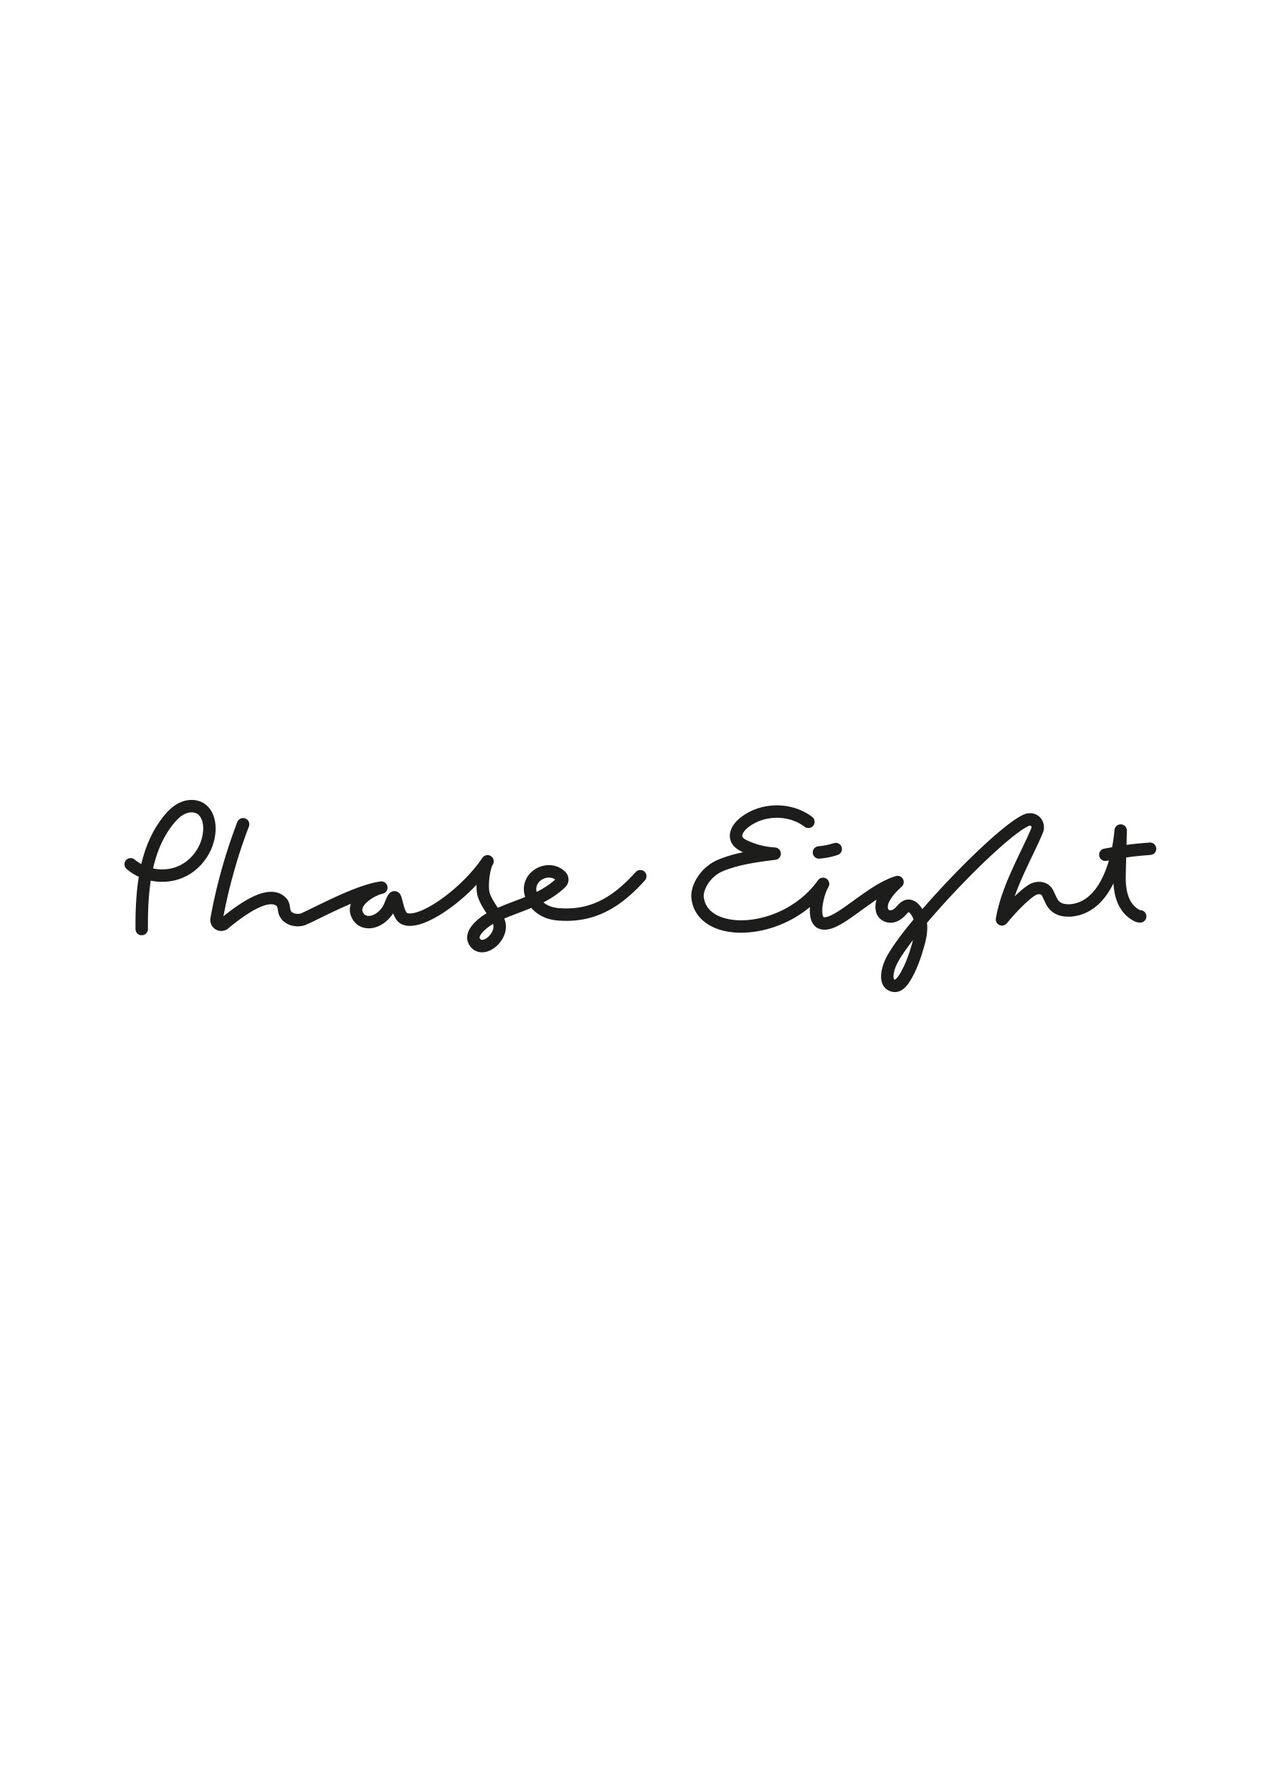 Thank you for shopping at Phase Eight Basel Bar